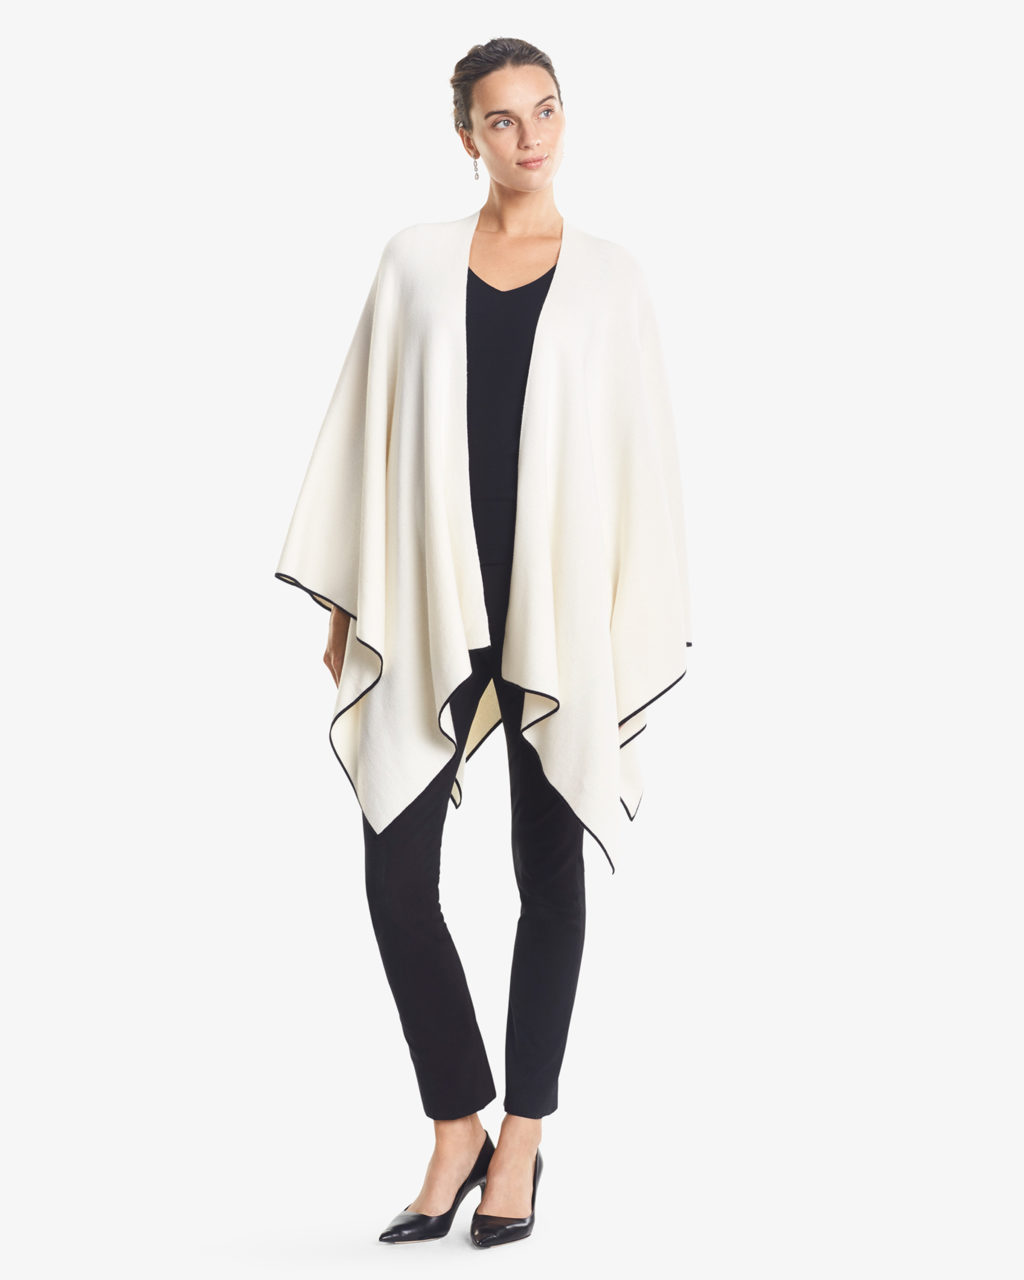 stylish comfortable travel clothes for women - white cashmere shawl